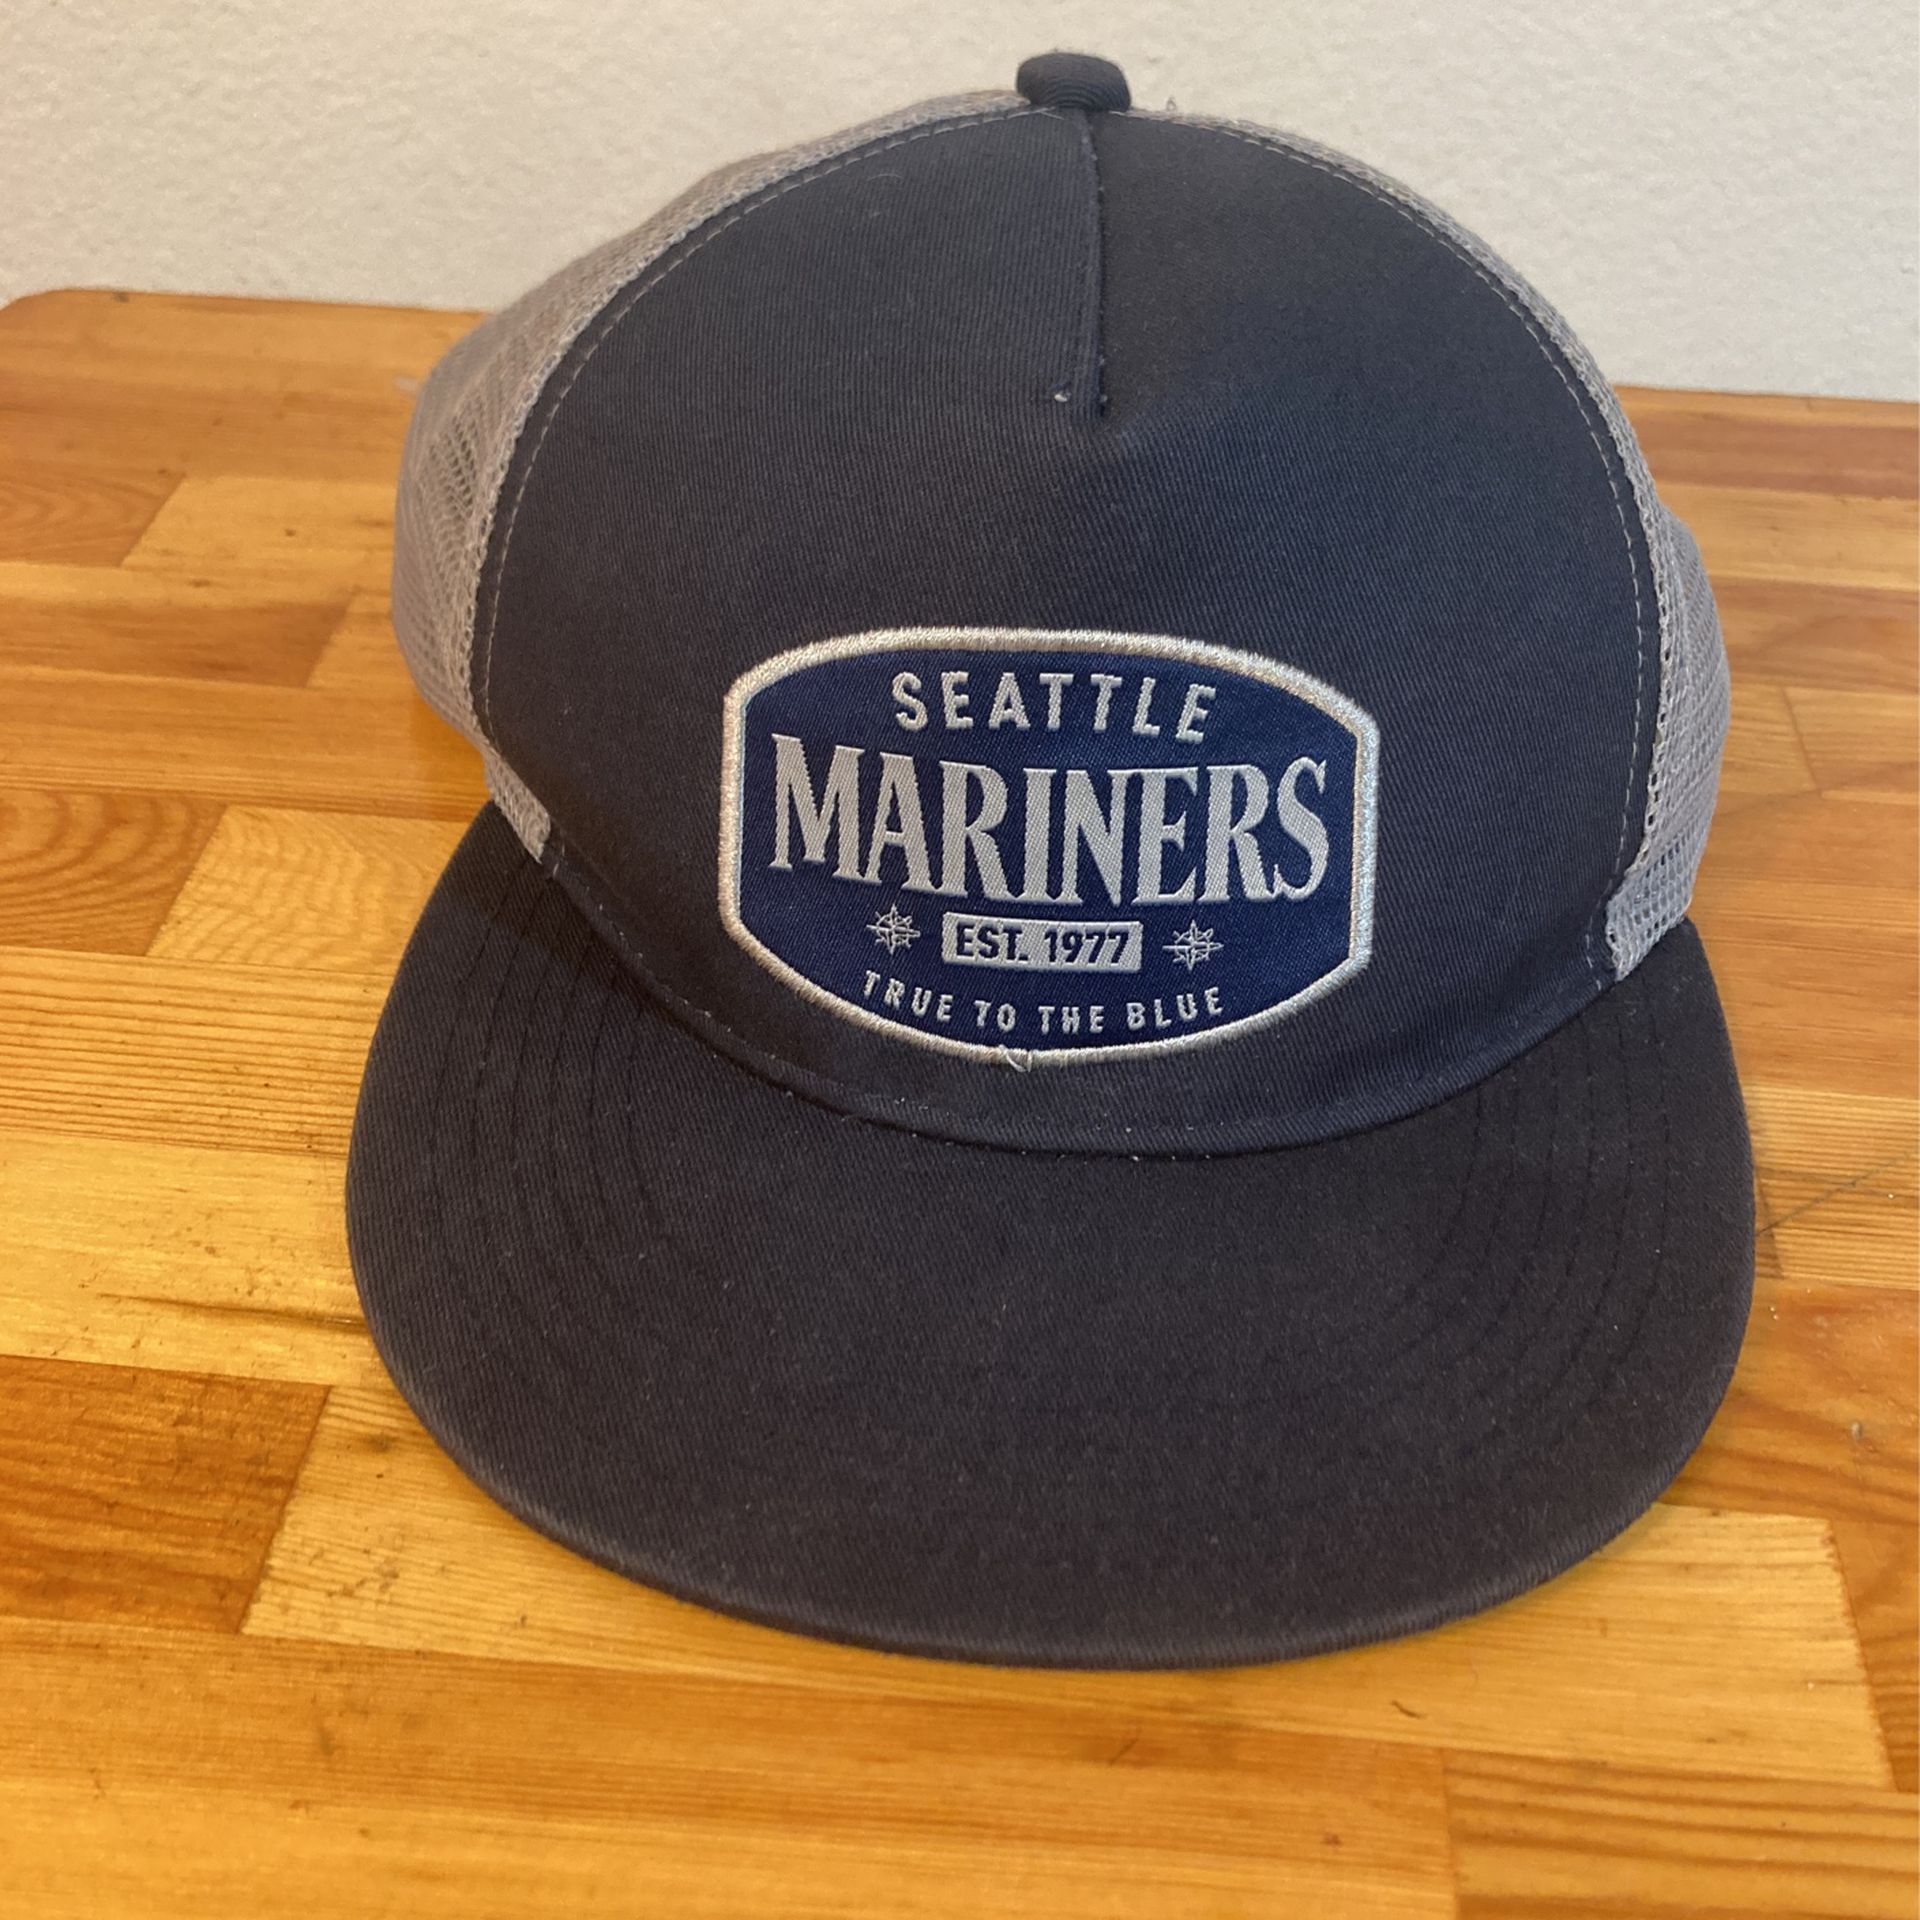 Seattle Mariners Old School Snap back 